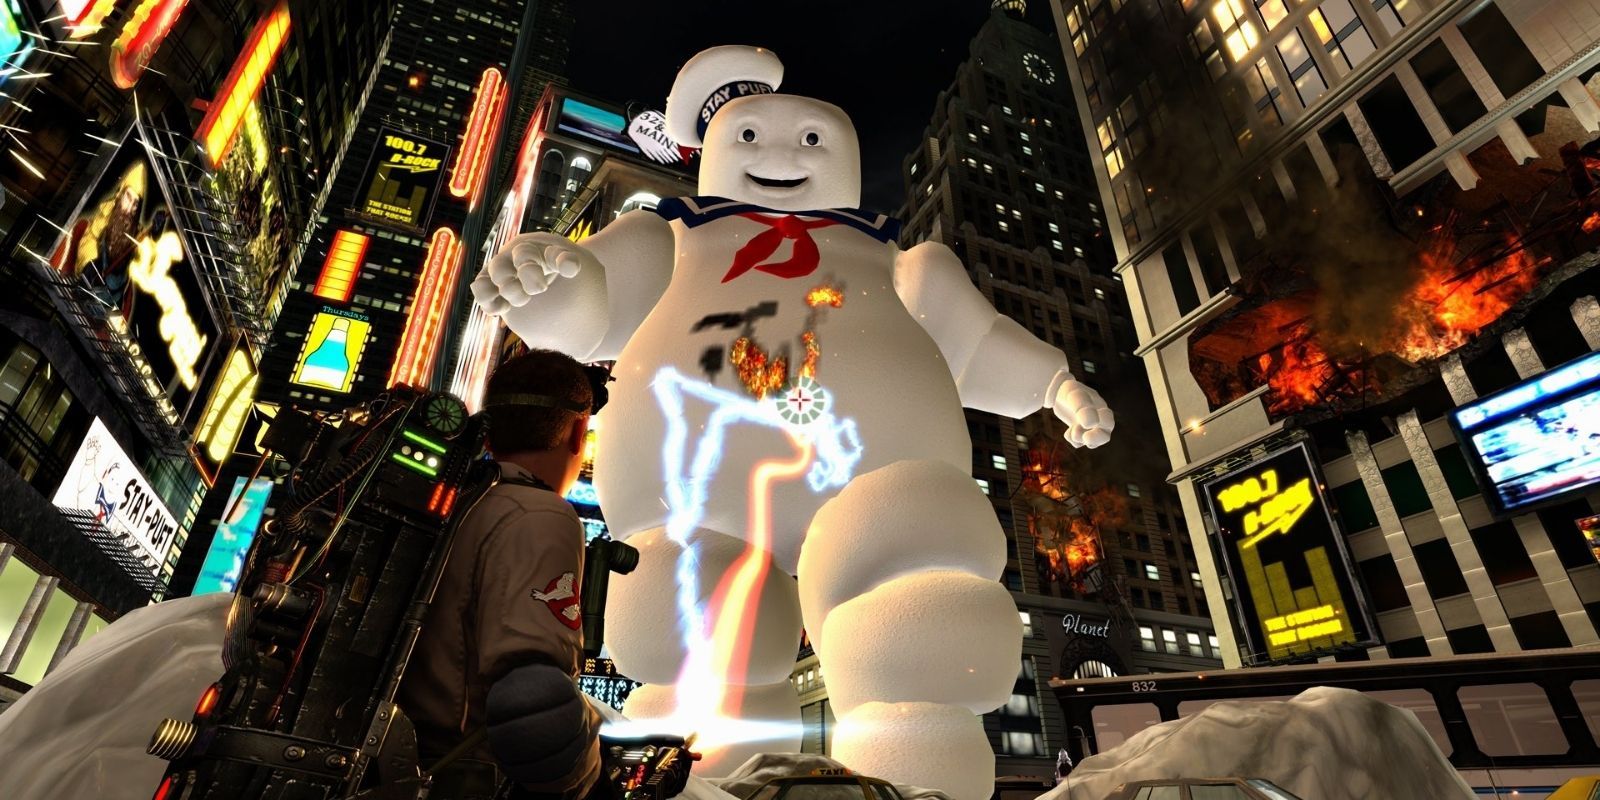 The Stay-Puft Marshmallow Man being lasered down by a Ghostbuster in the video game